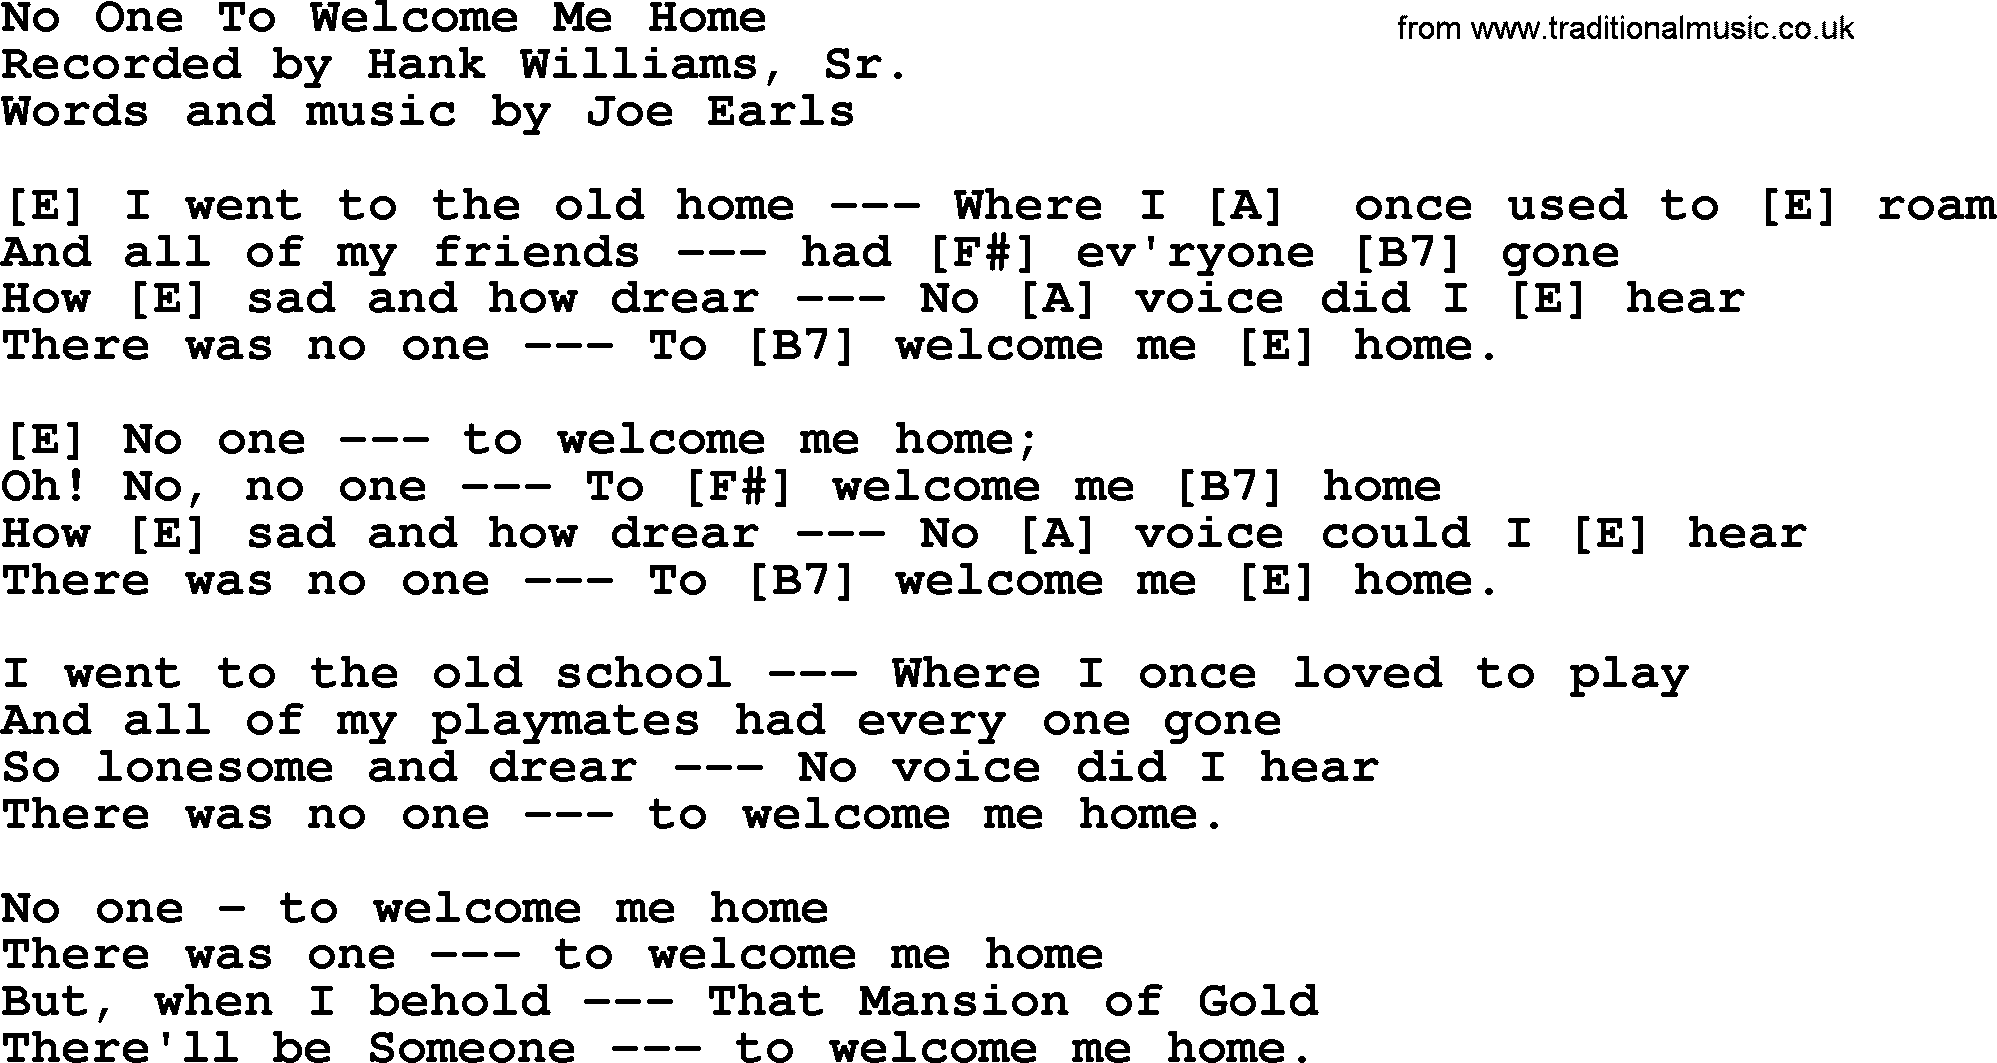 Hank Williams song No One To Welcome Me Home, lyrics and chords